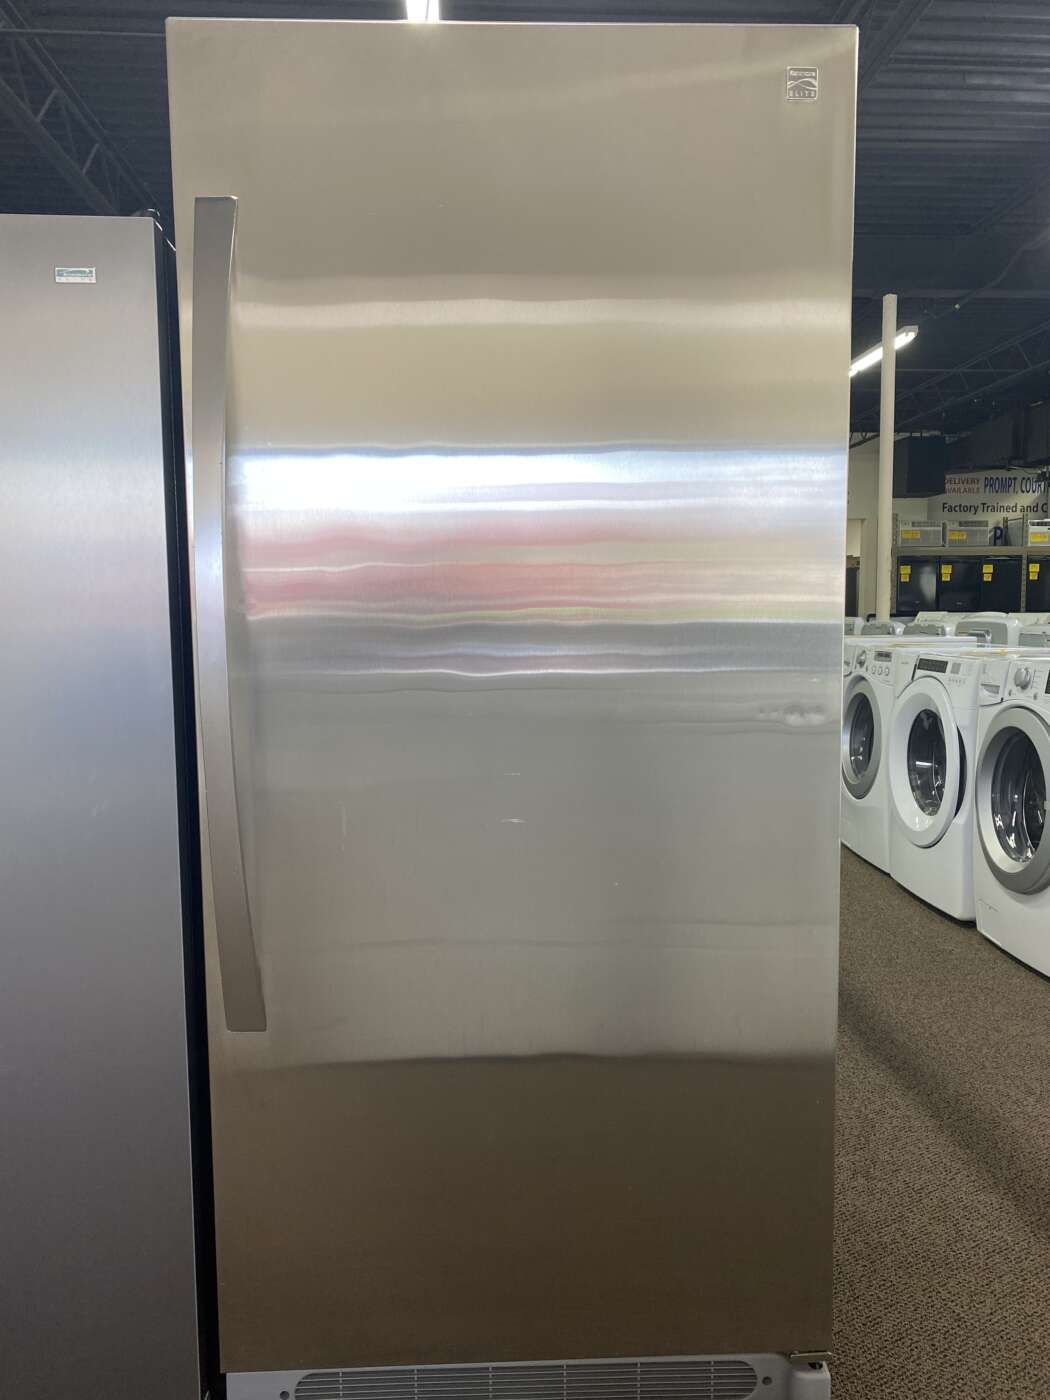 Reconditioned KENMORE 19 Cu. Ft. All Refrigerator